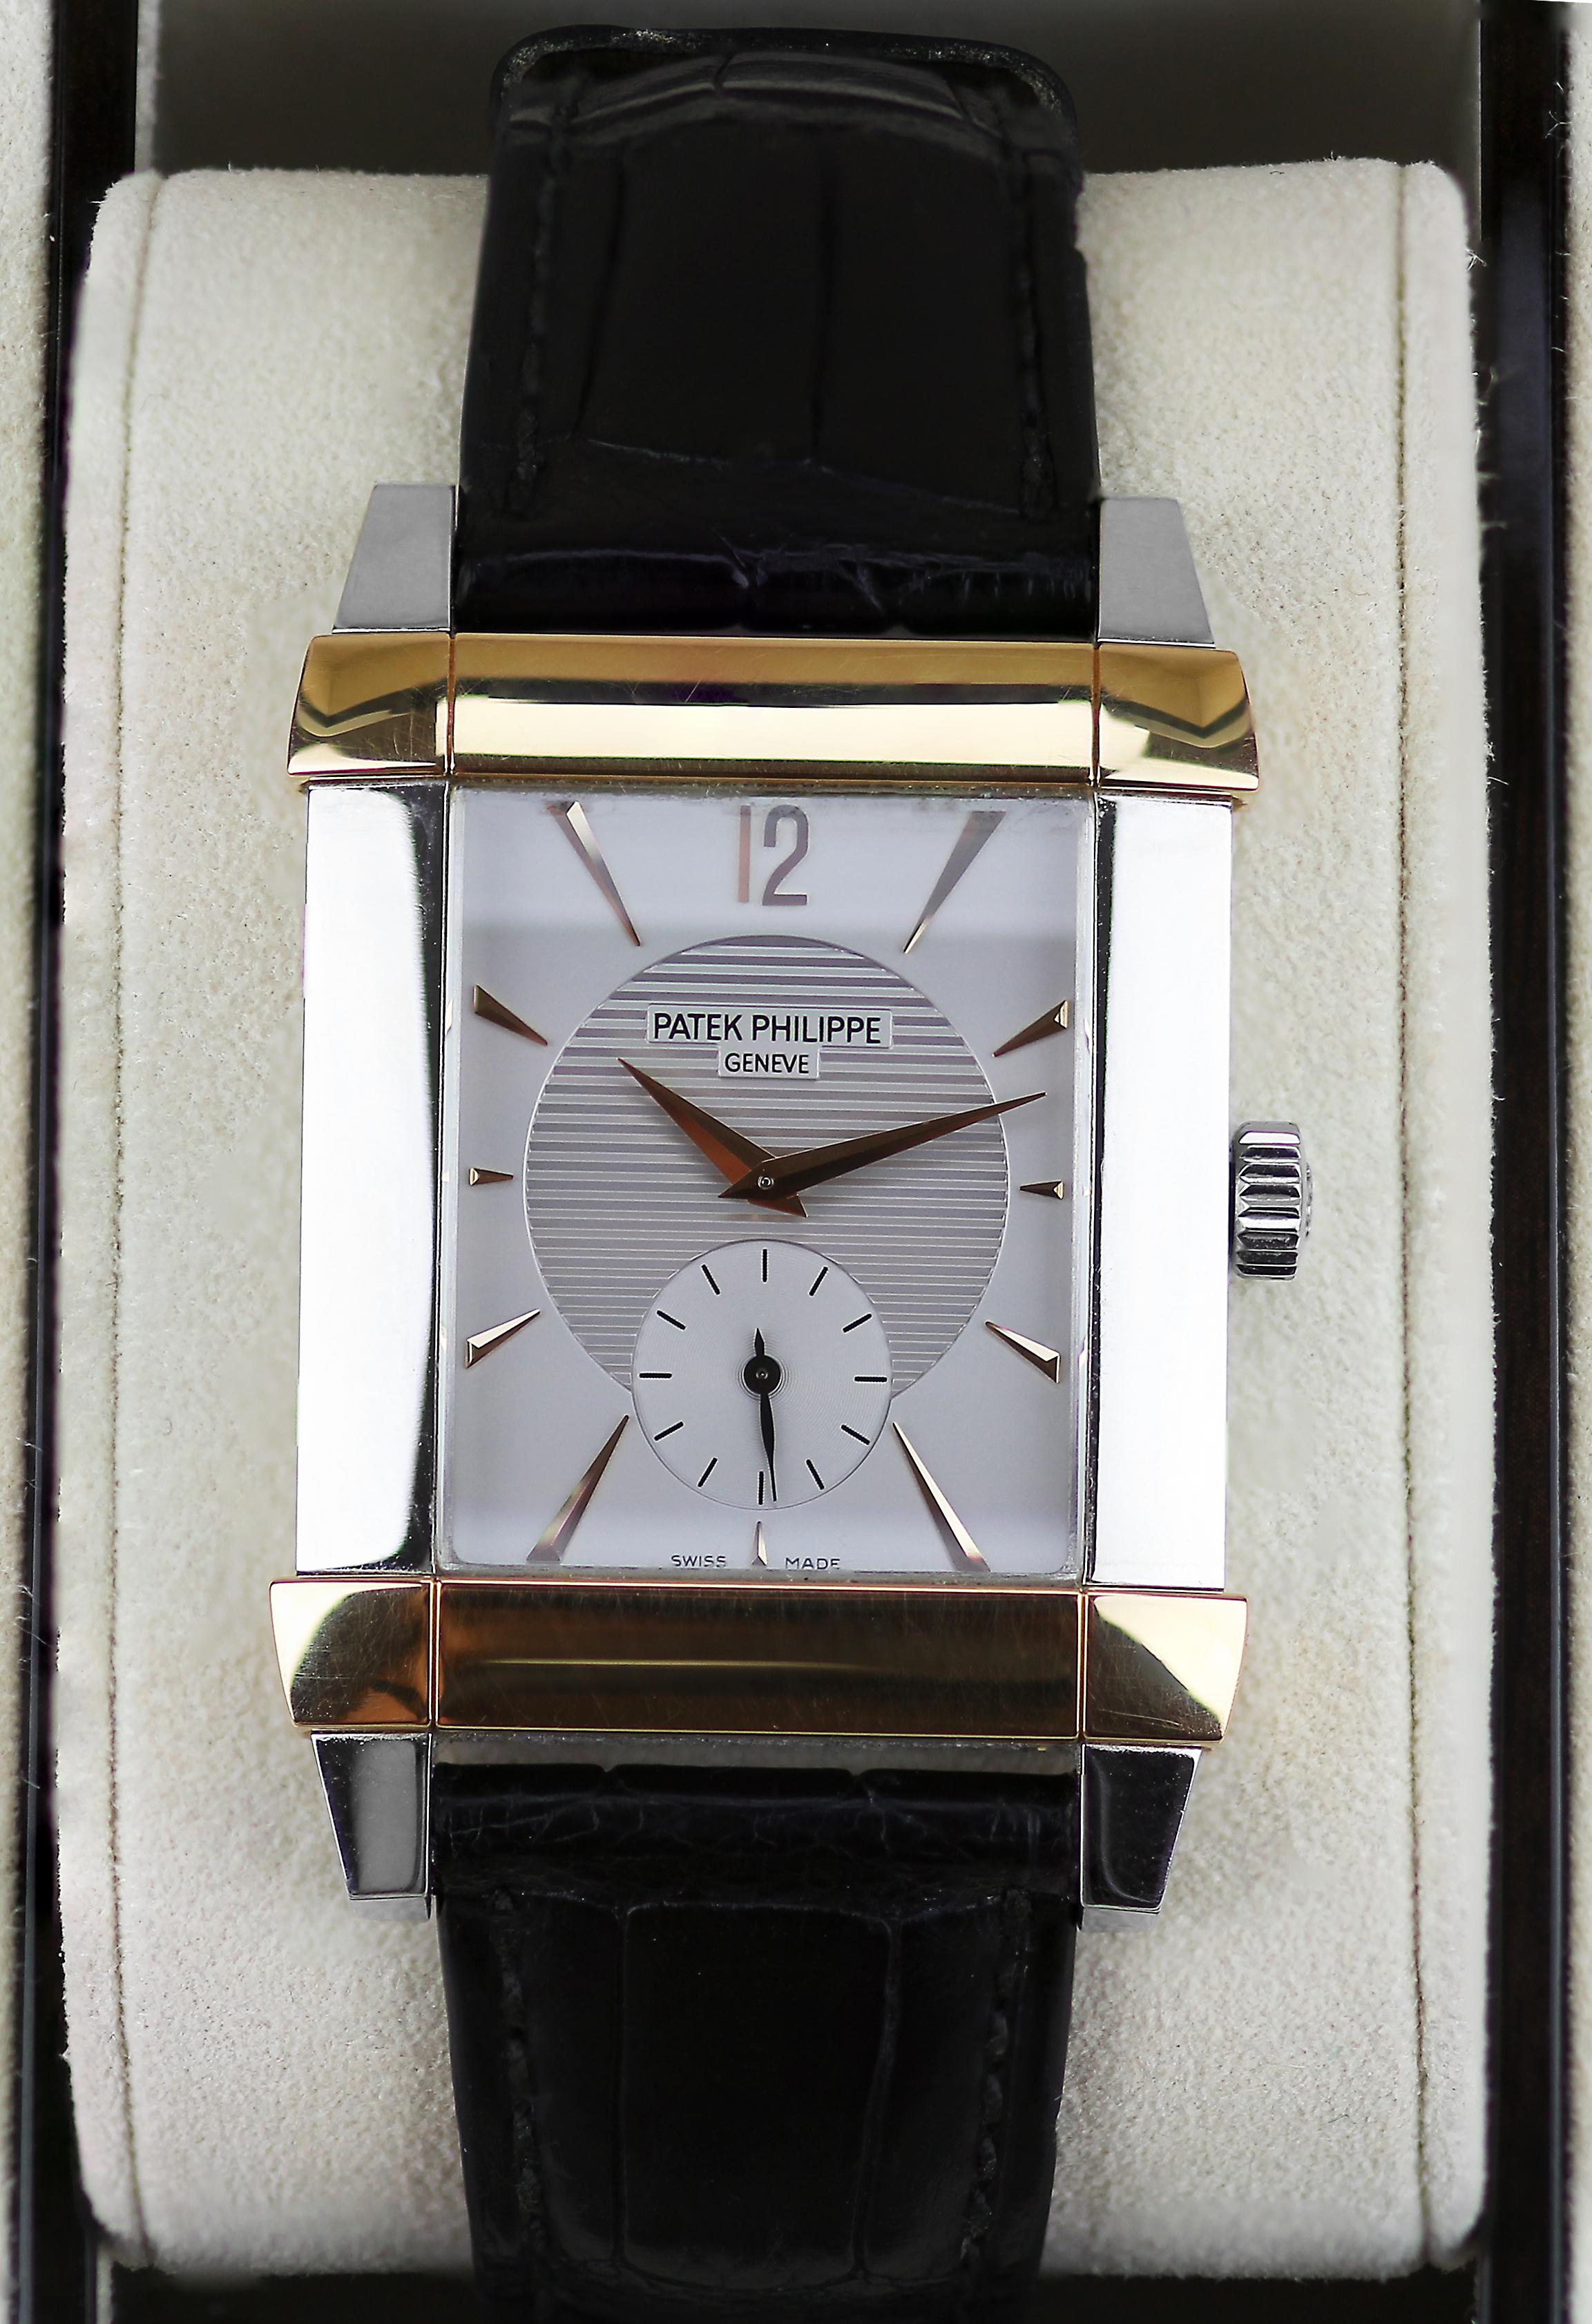 Platinum and rose gold case with a black leather strap include original box and papers. Fixed bezel. Silver dial with gold-toned hands and index hour markers. 
Dial Type: Analog. Small seconds sub-dial. Manual wind movement. Scratch resistant